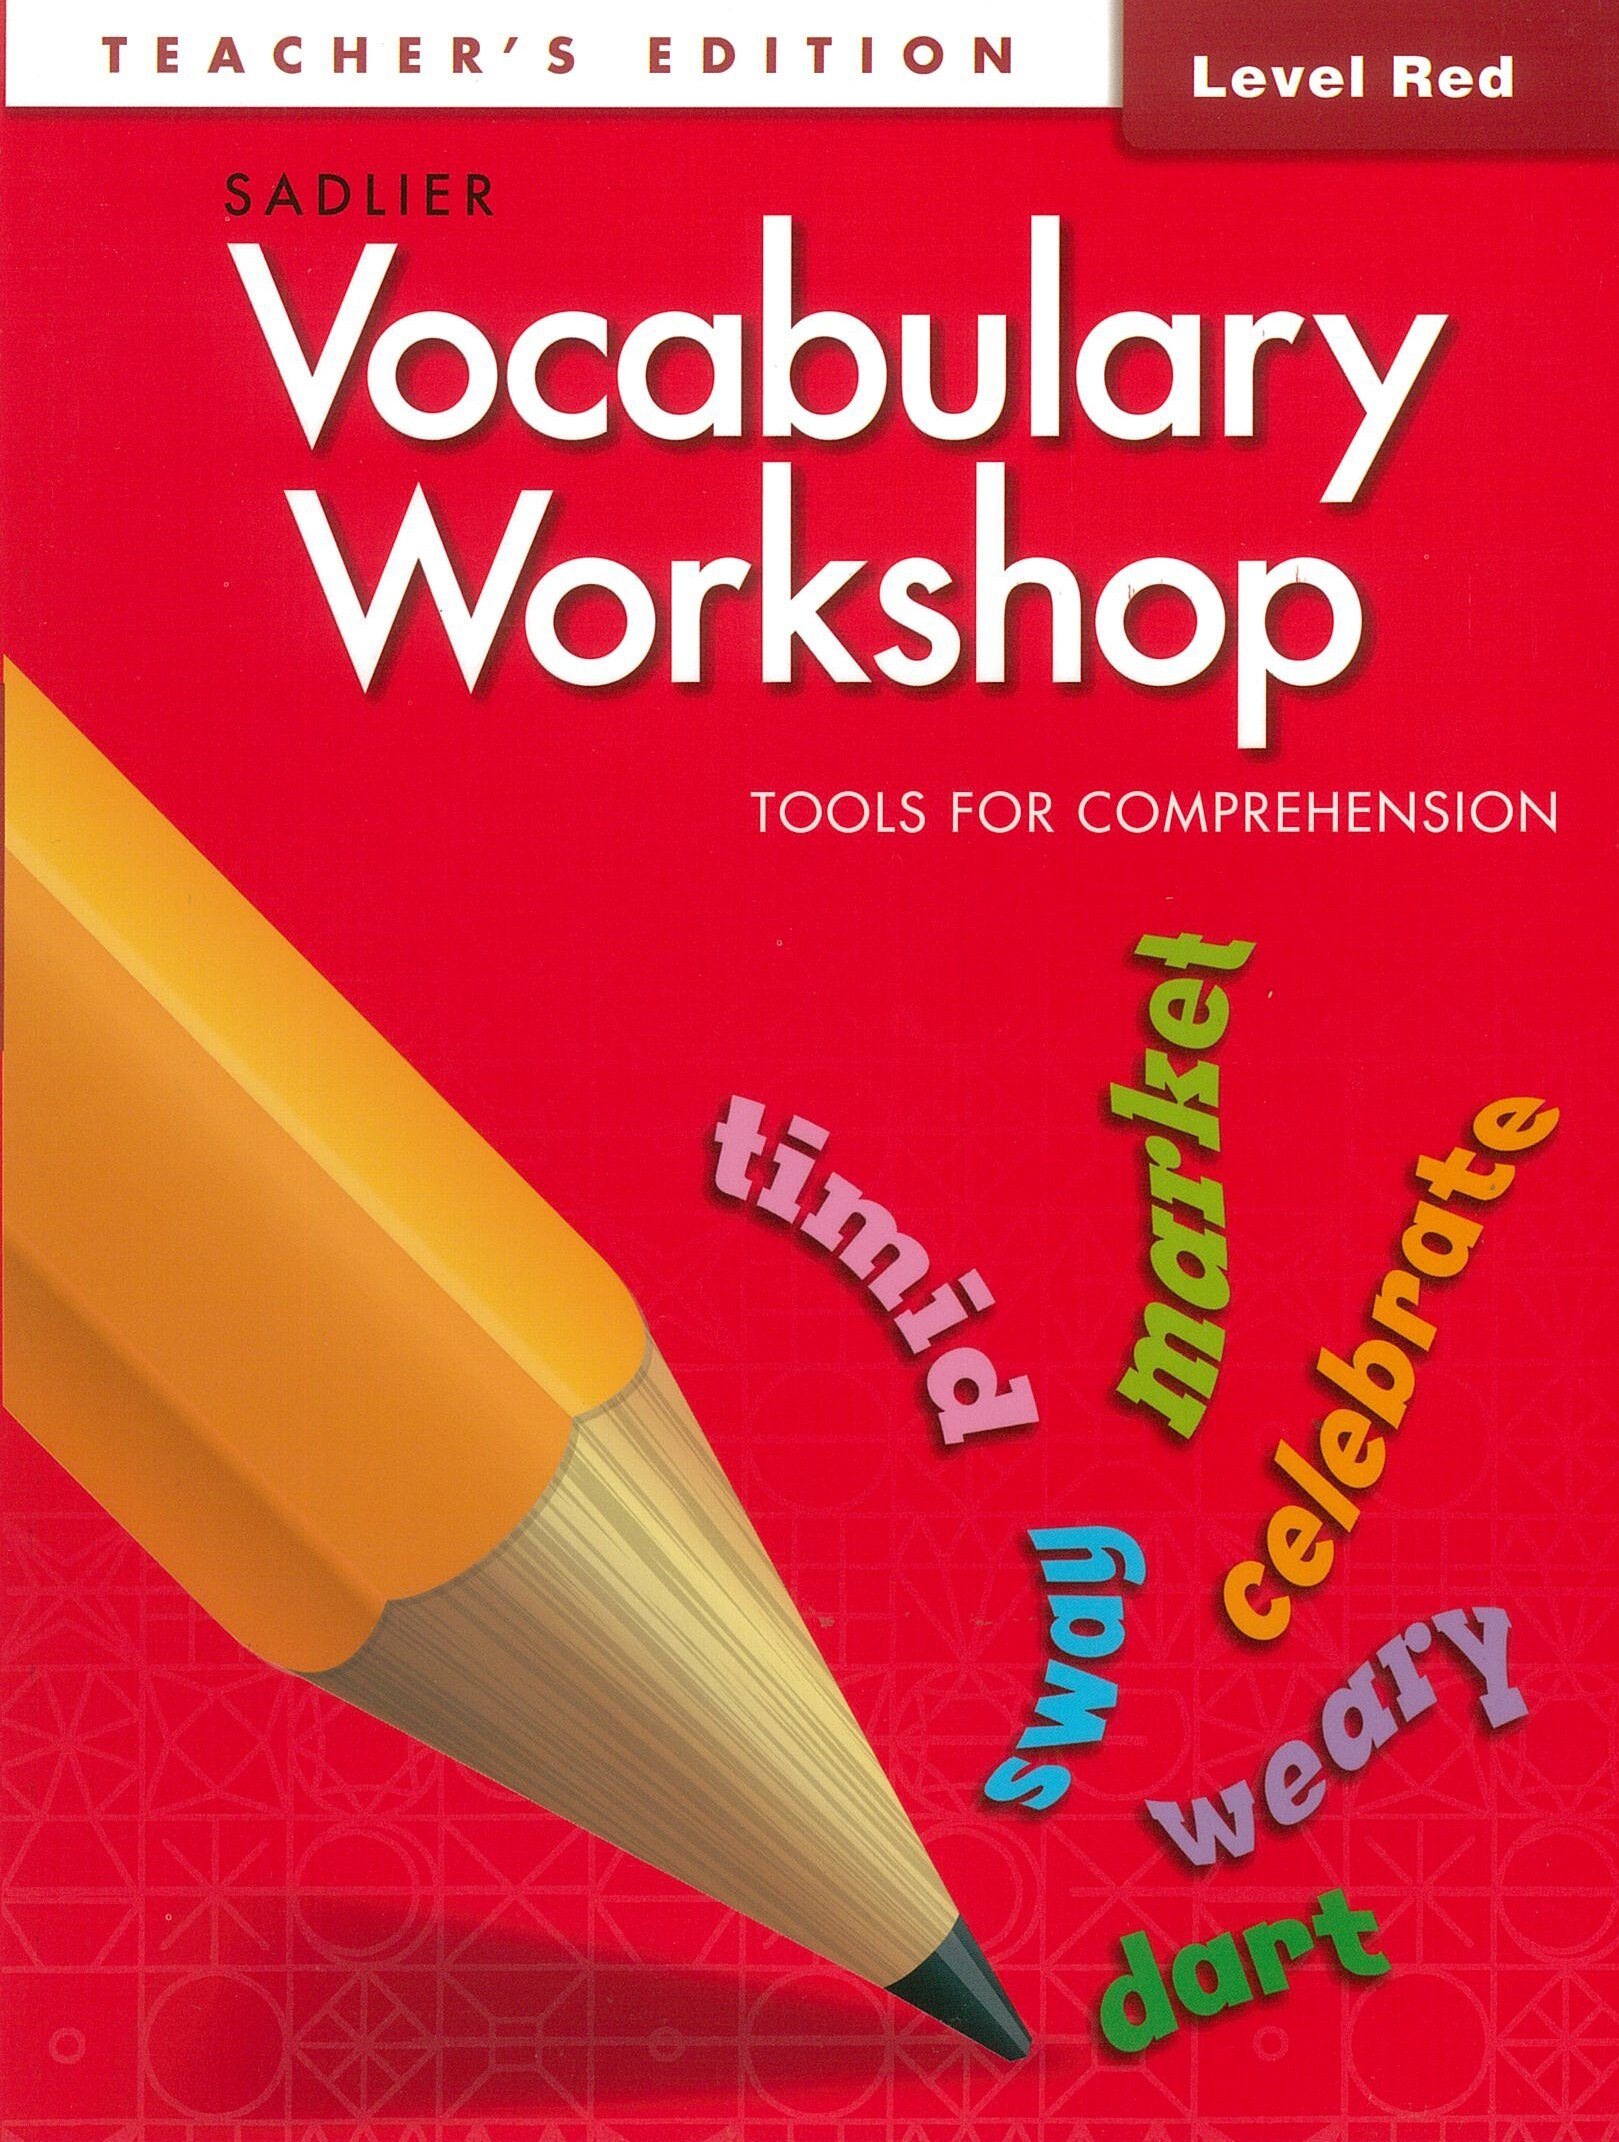 Vocabulary Workshop Tools for Comprehension Teachers Edition Red(G-1) (Paperback)